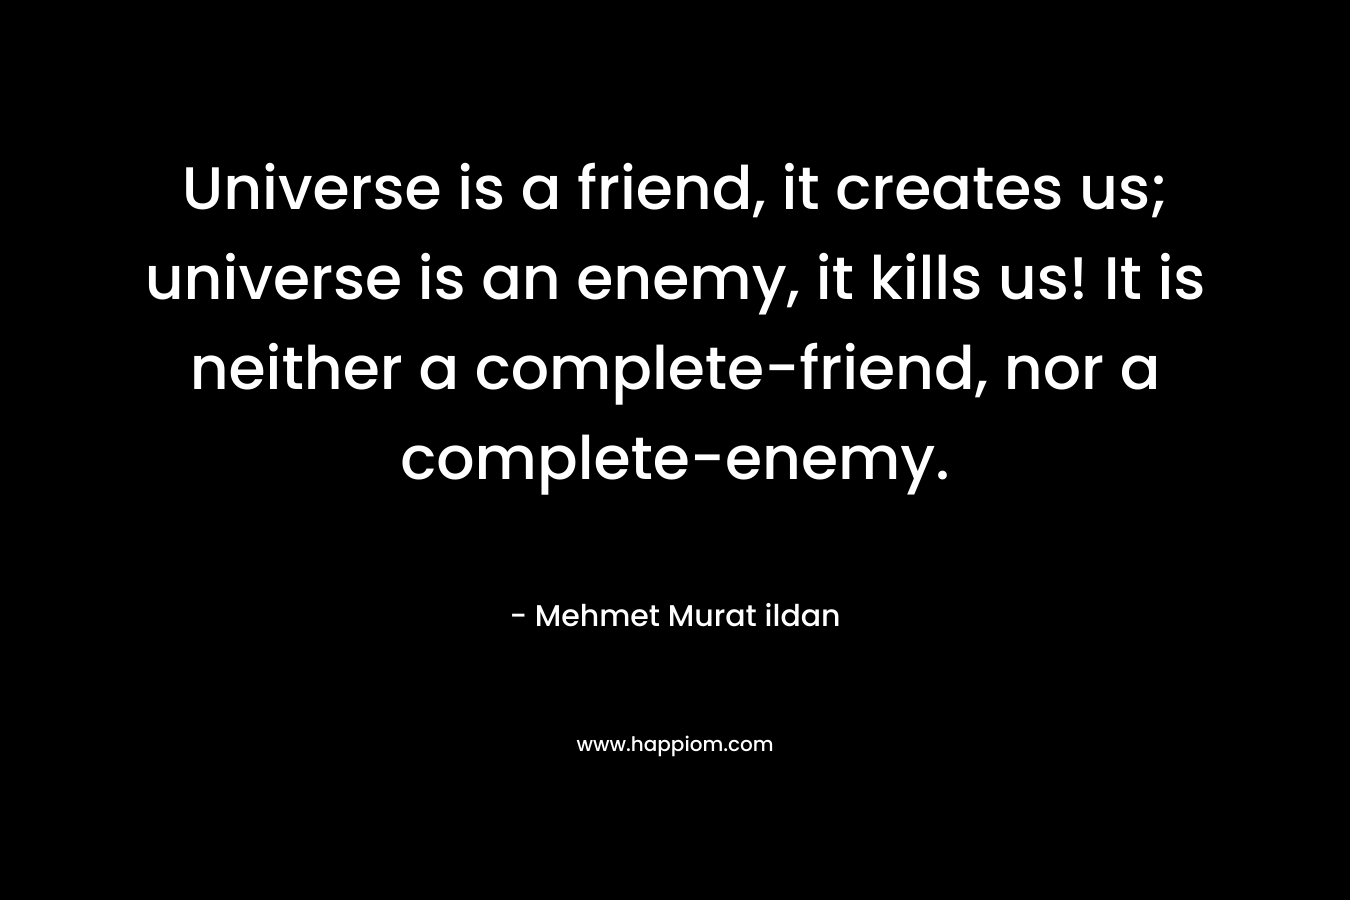 Universe is a friend, it creates us; universe is an enemy, it kills us! It is neither a complete-friend, nor a complete-enemy.